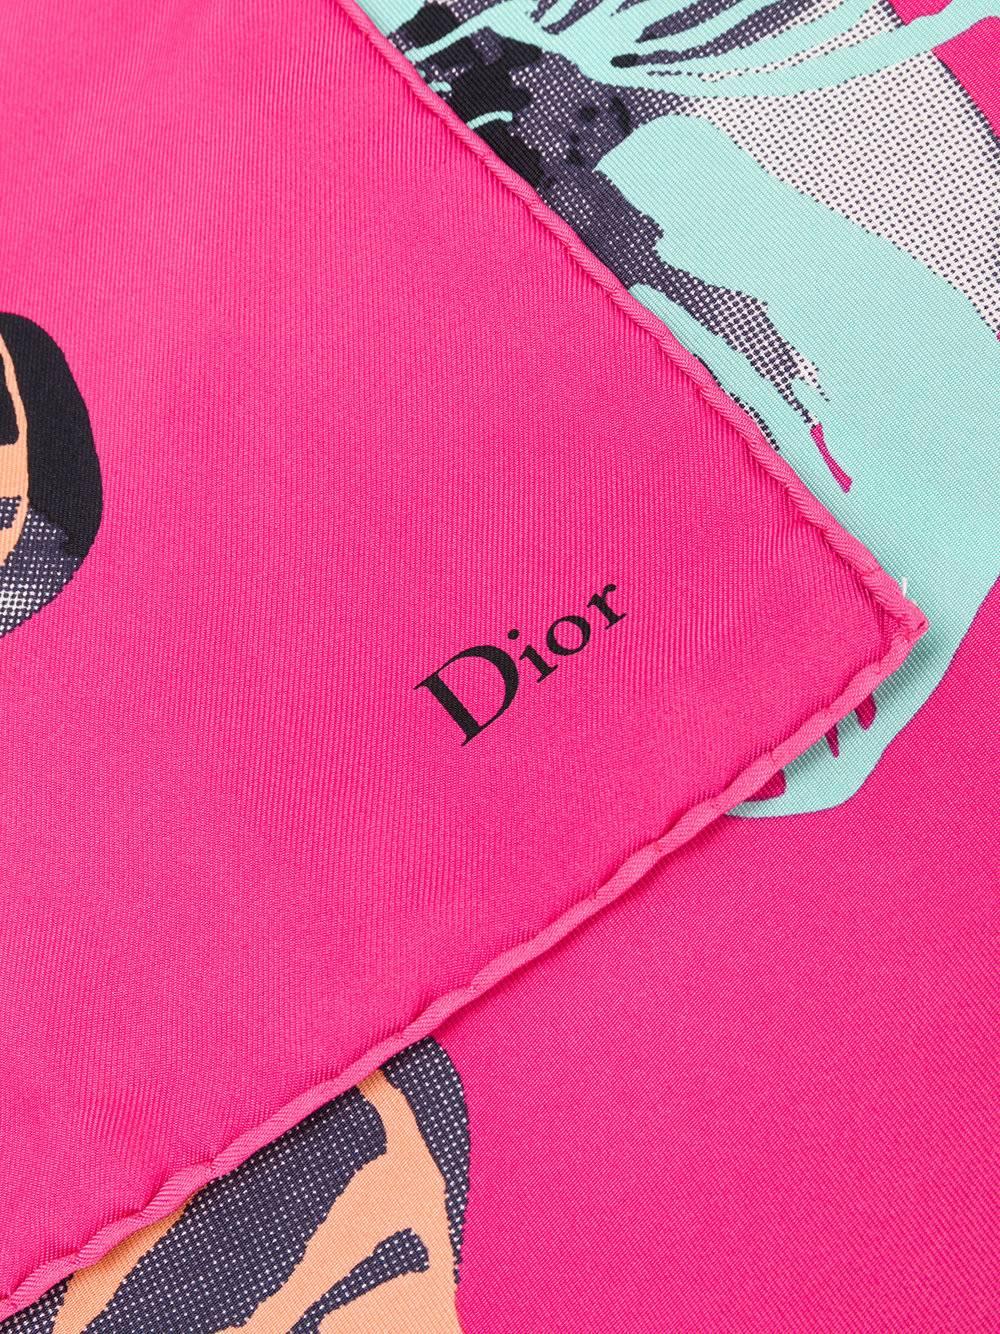 This Dior scarf is crafted from a soft pure silk in bright pink, this scarf presents a romantic mixture of floral prints and modern sketches. With finished edges, Dior's logo is subtly printed on the rim. It also features an elongated length,